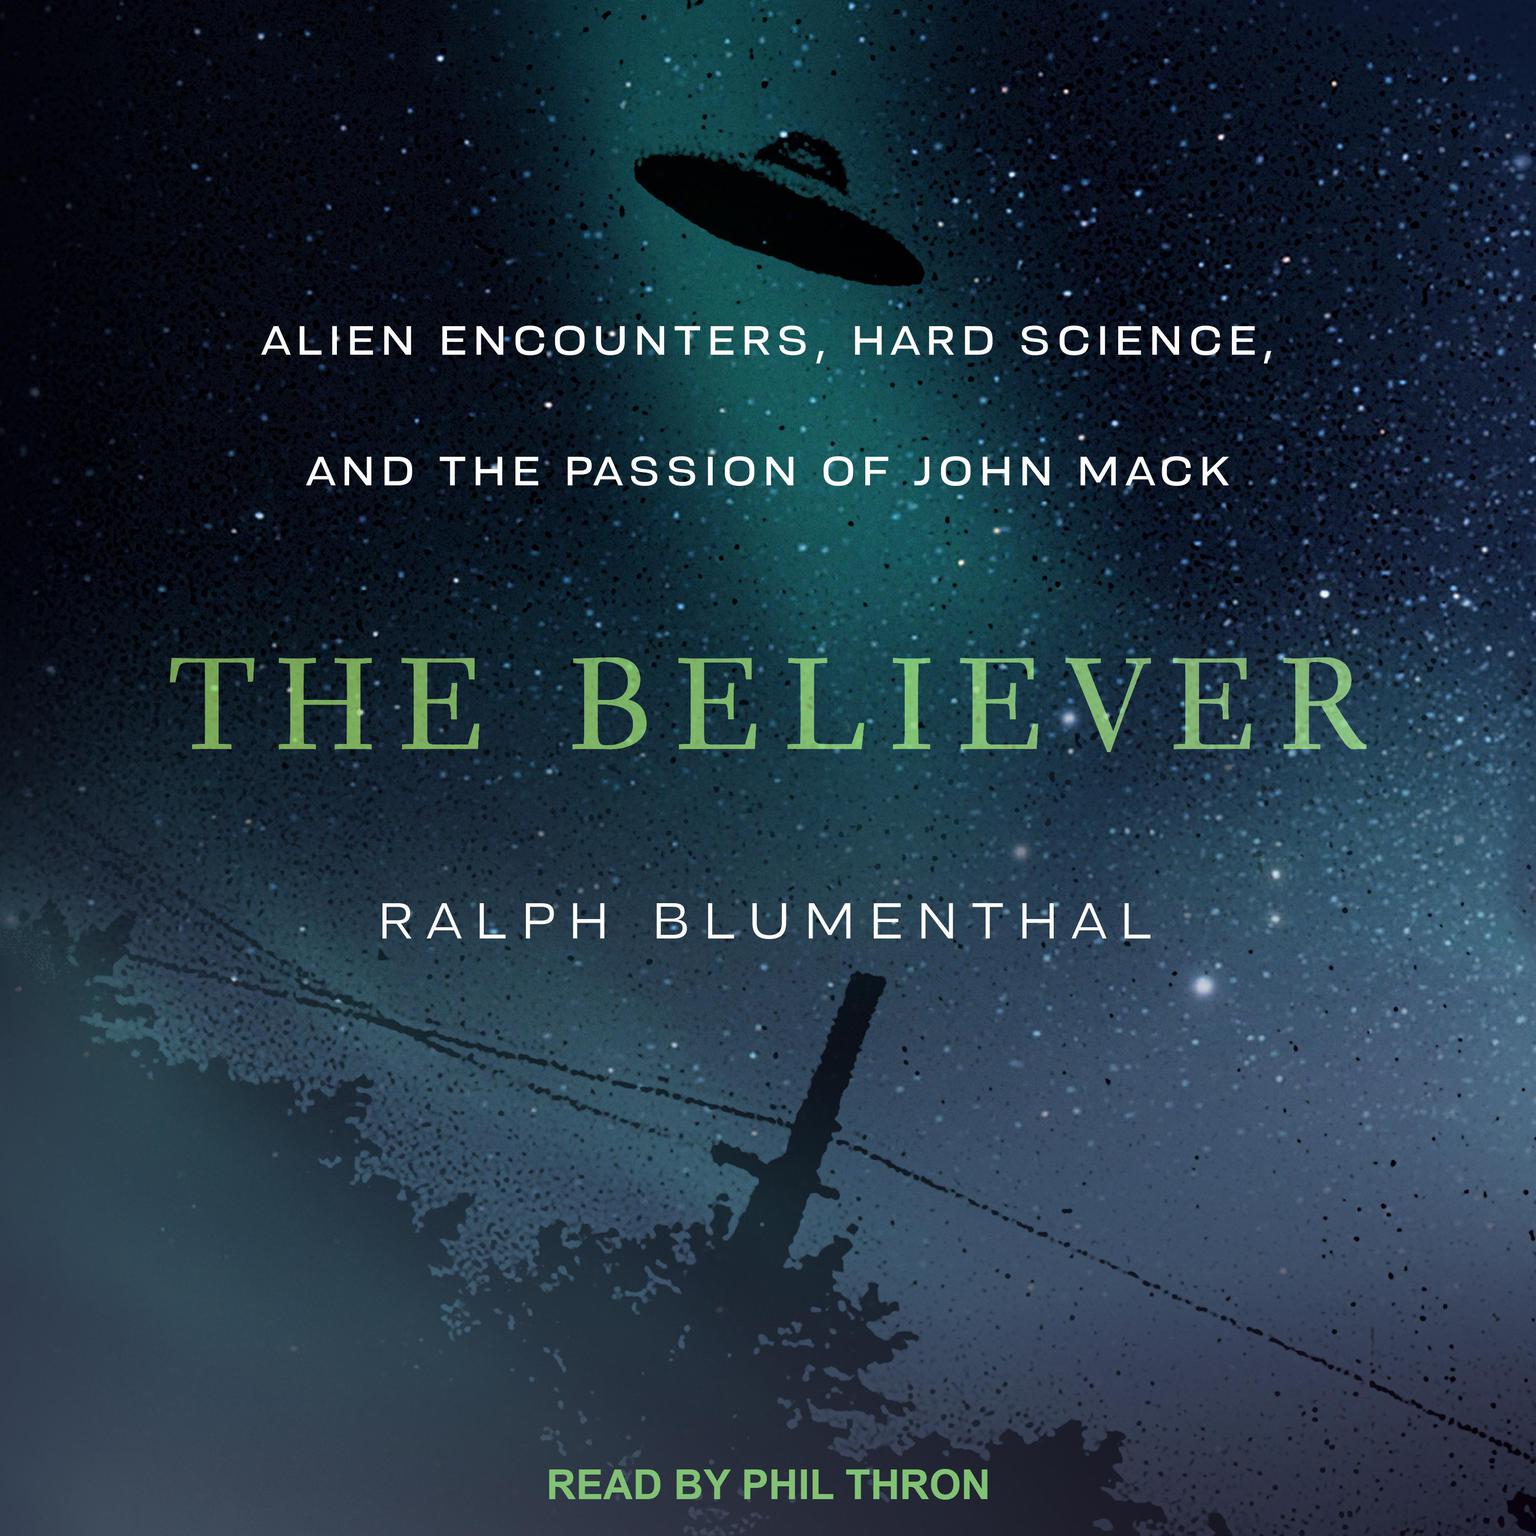 The Believer: Alien Encounters, Hard Science, and the Passion of John Mack Audiobook, by Ralph Blumenthal